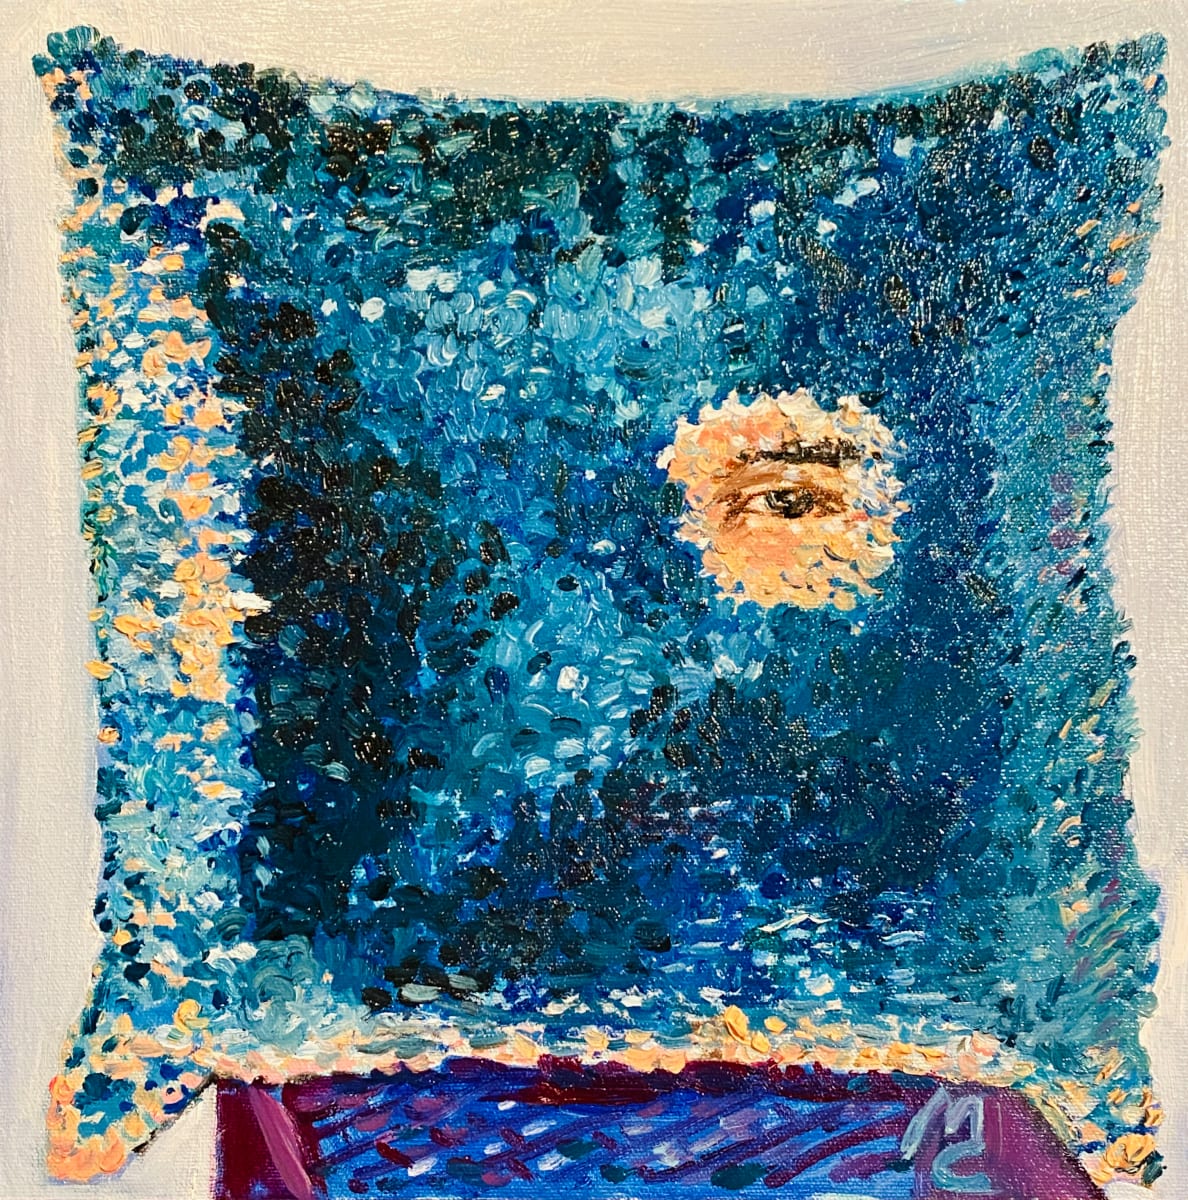 Day 6- Eye on Keanu- Sparkle pillow by May Charters  Image: Day 6 of the sequin Keanu reeves pillow. Just his eye.